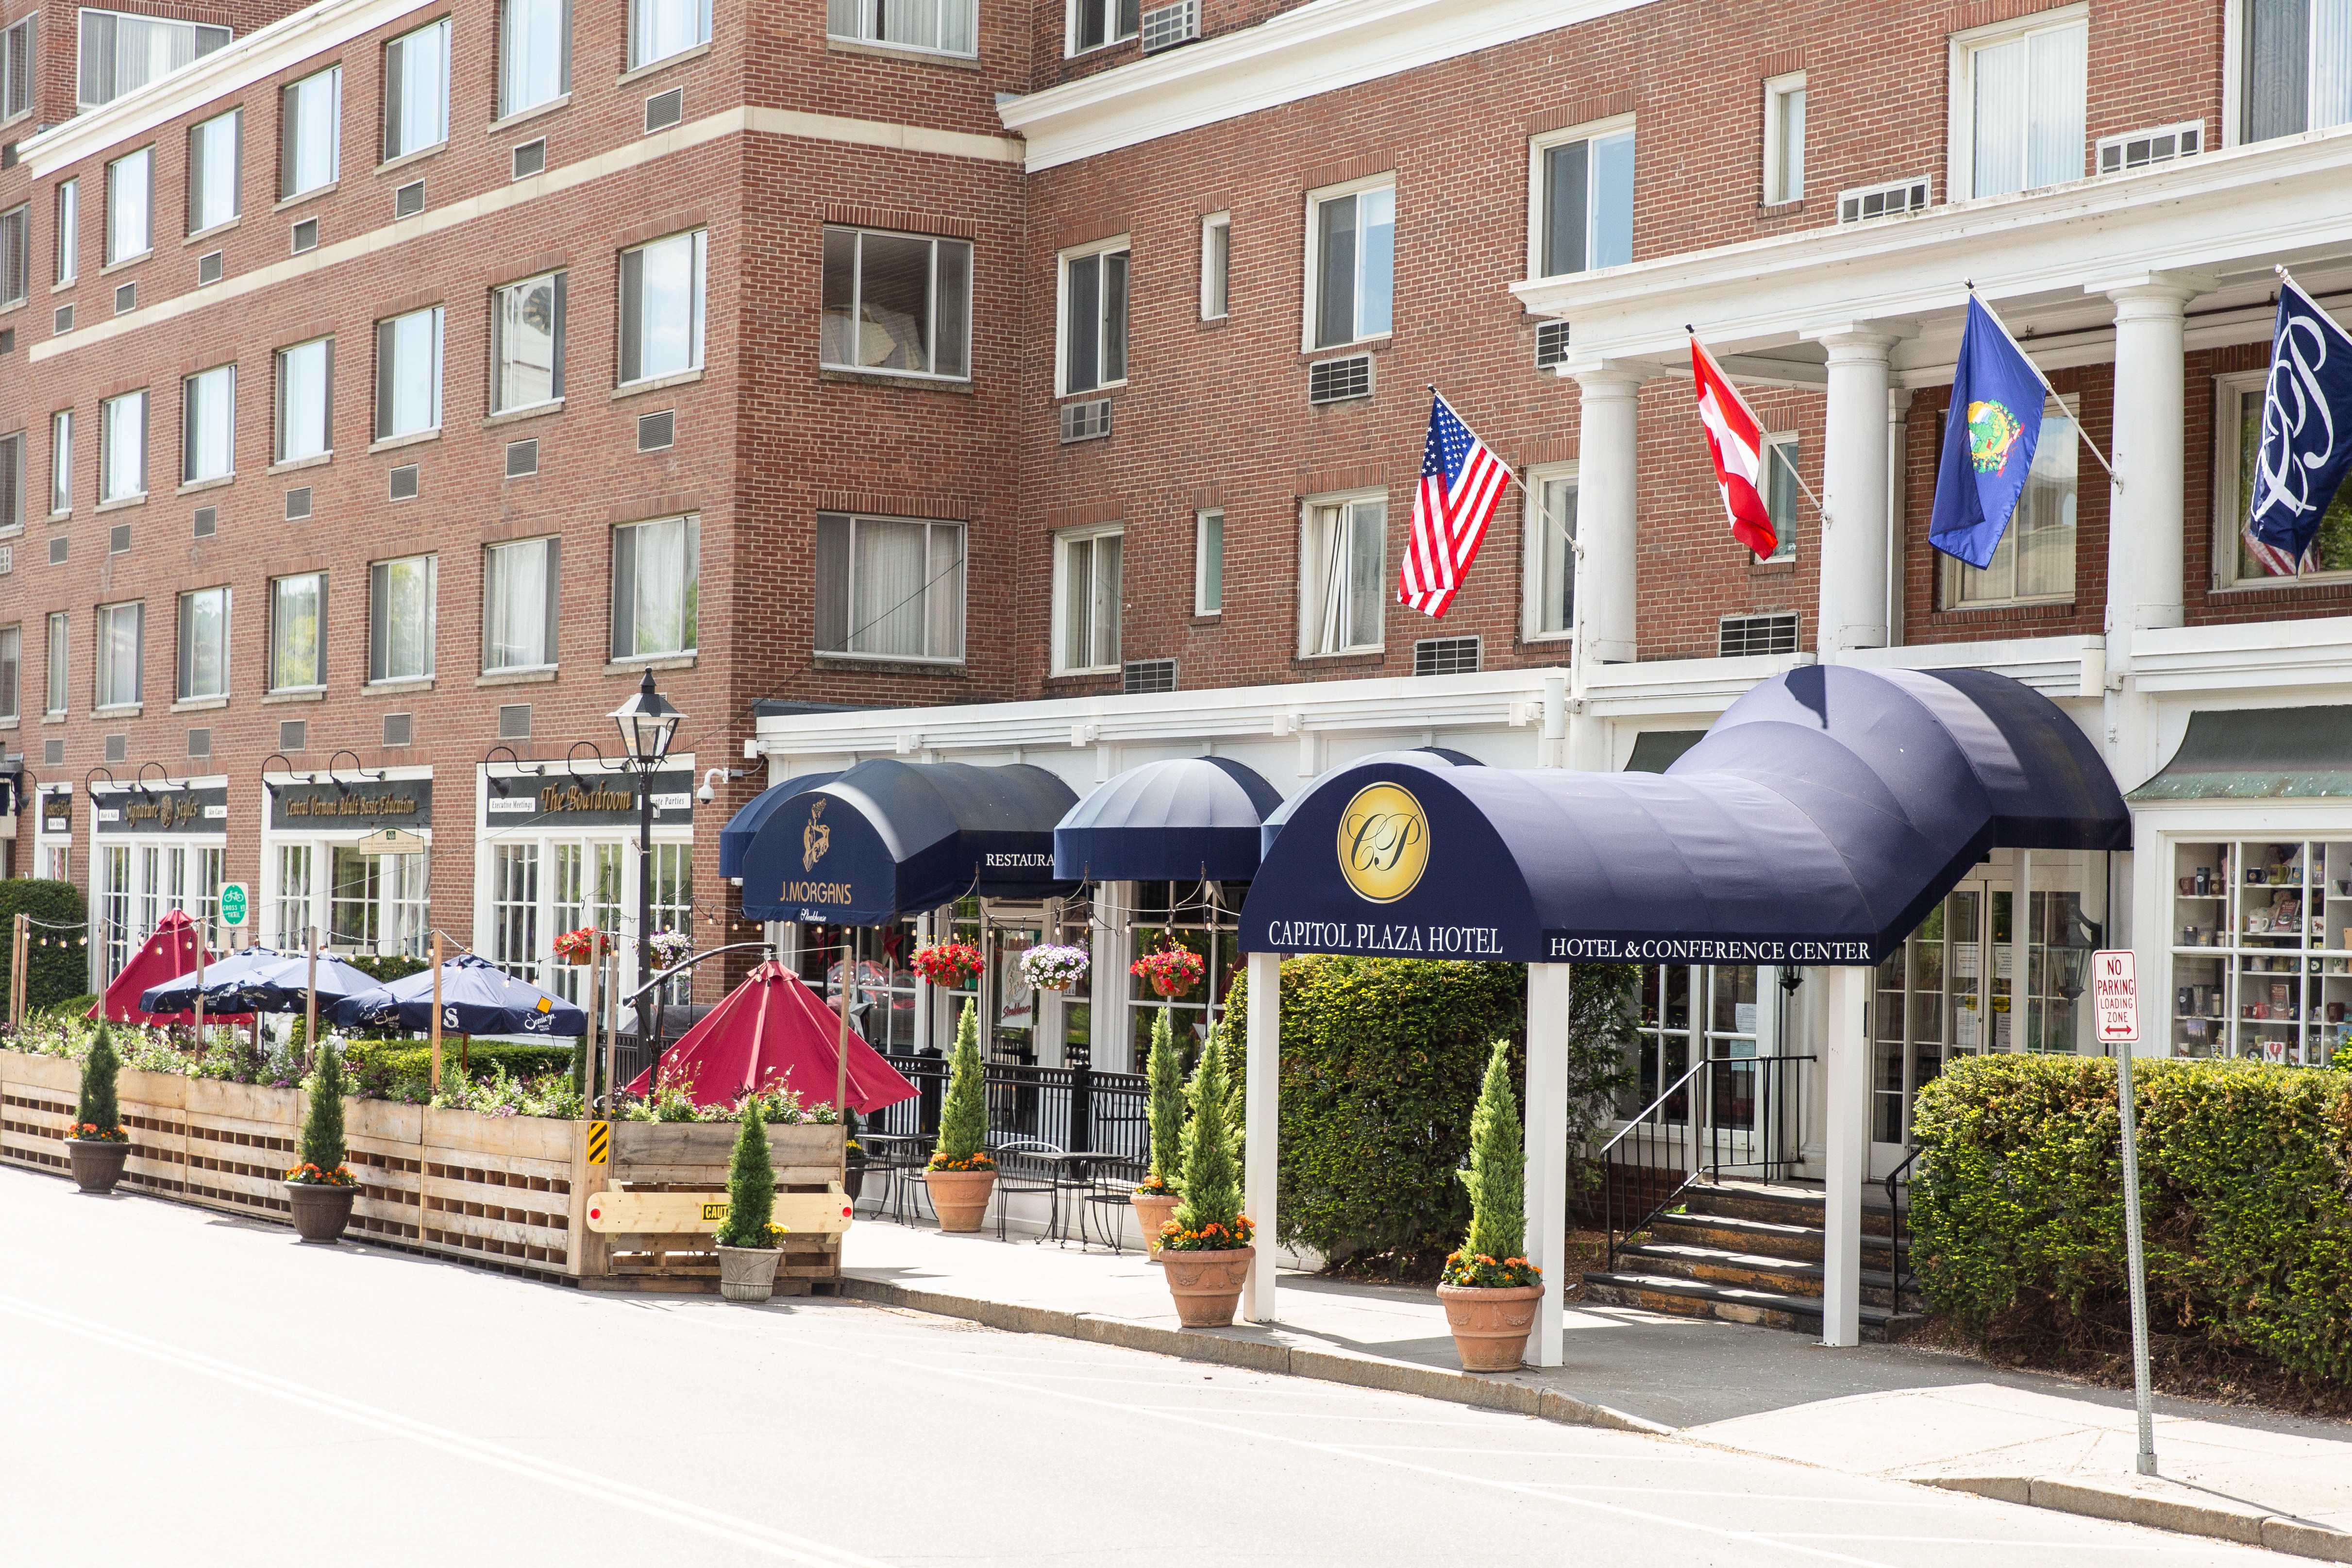 Hotel Covered Entrance and Flags Attached to Building